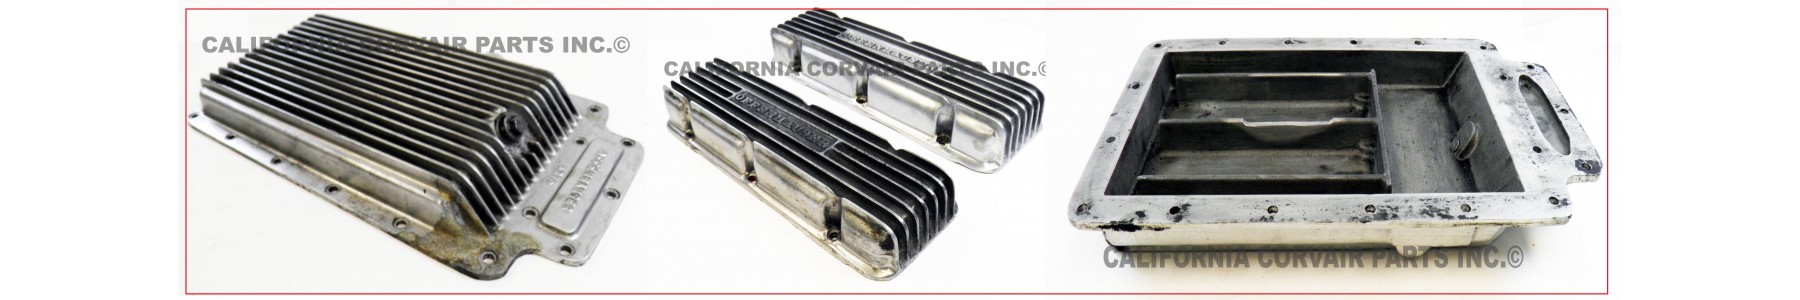 USED ALUMINUM OIL PANS & VALVE COVERS